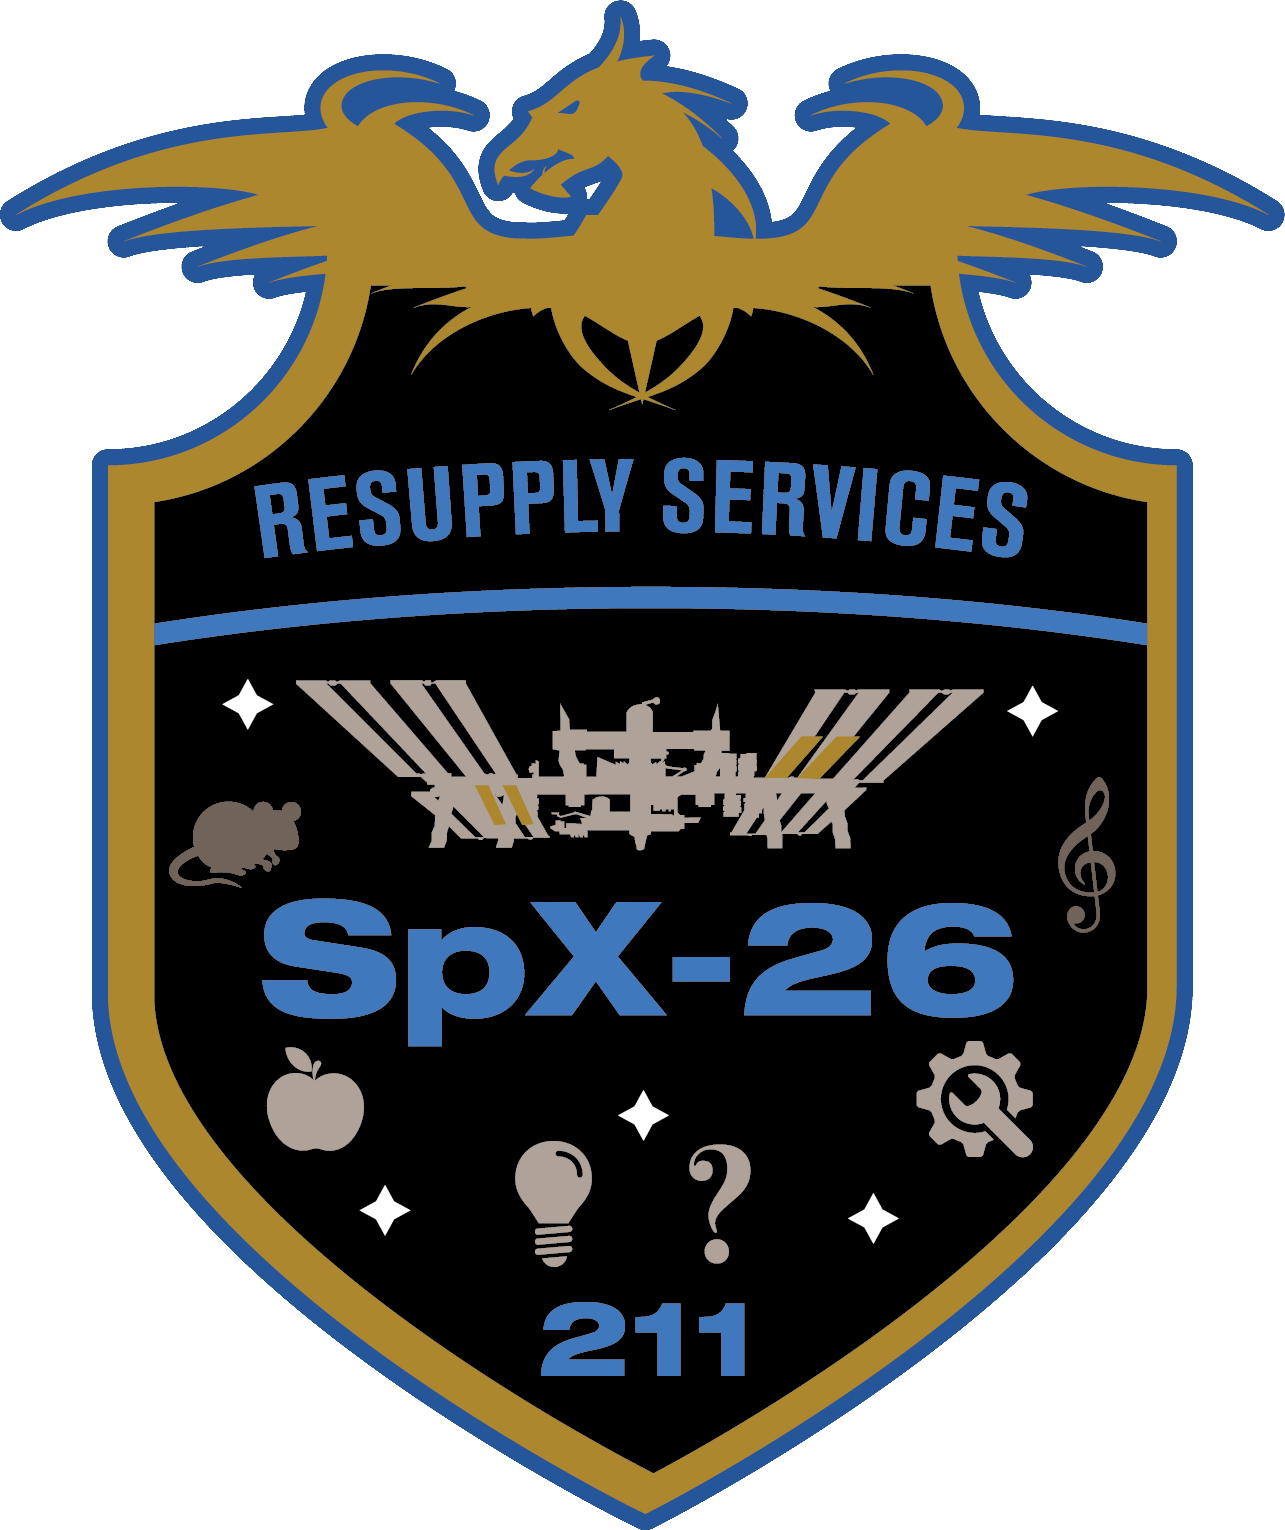 Mission patch for Dragon CRS-2 SpX-26